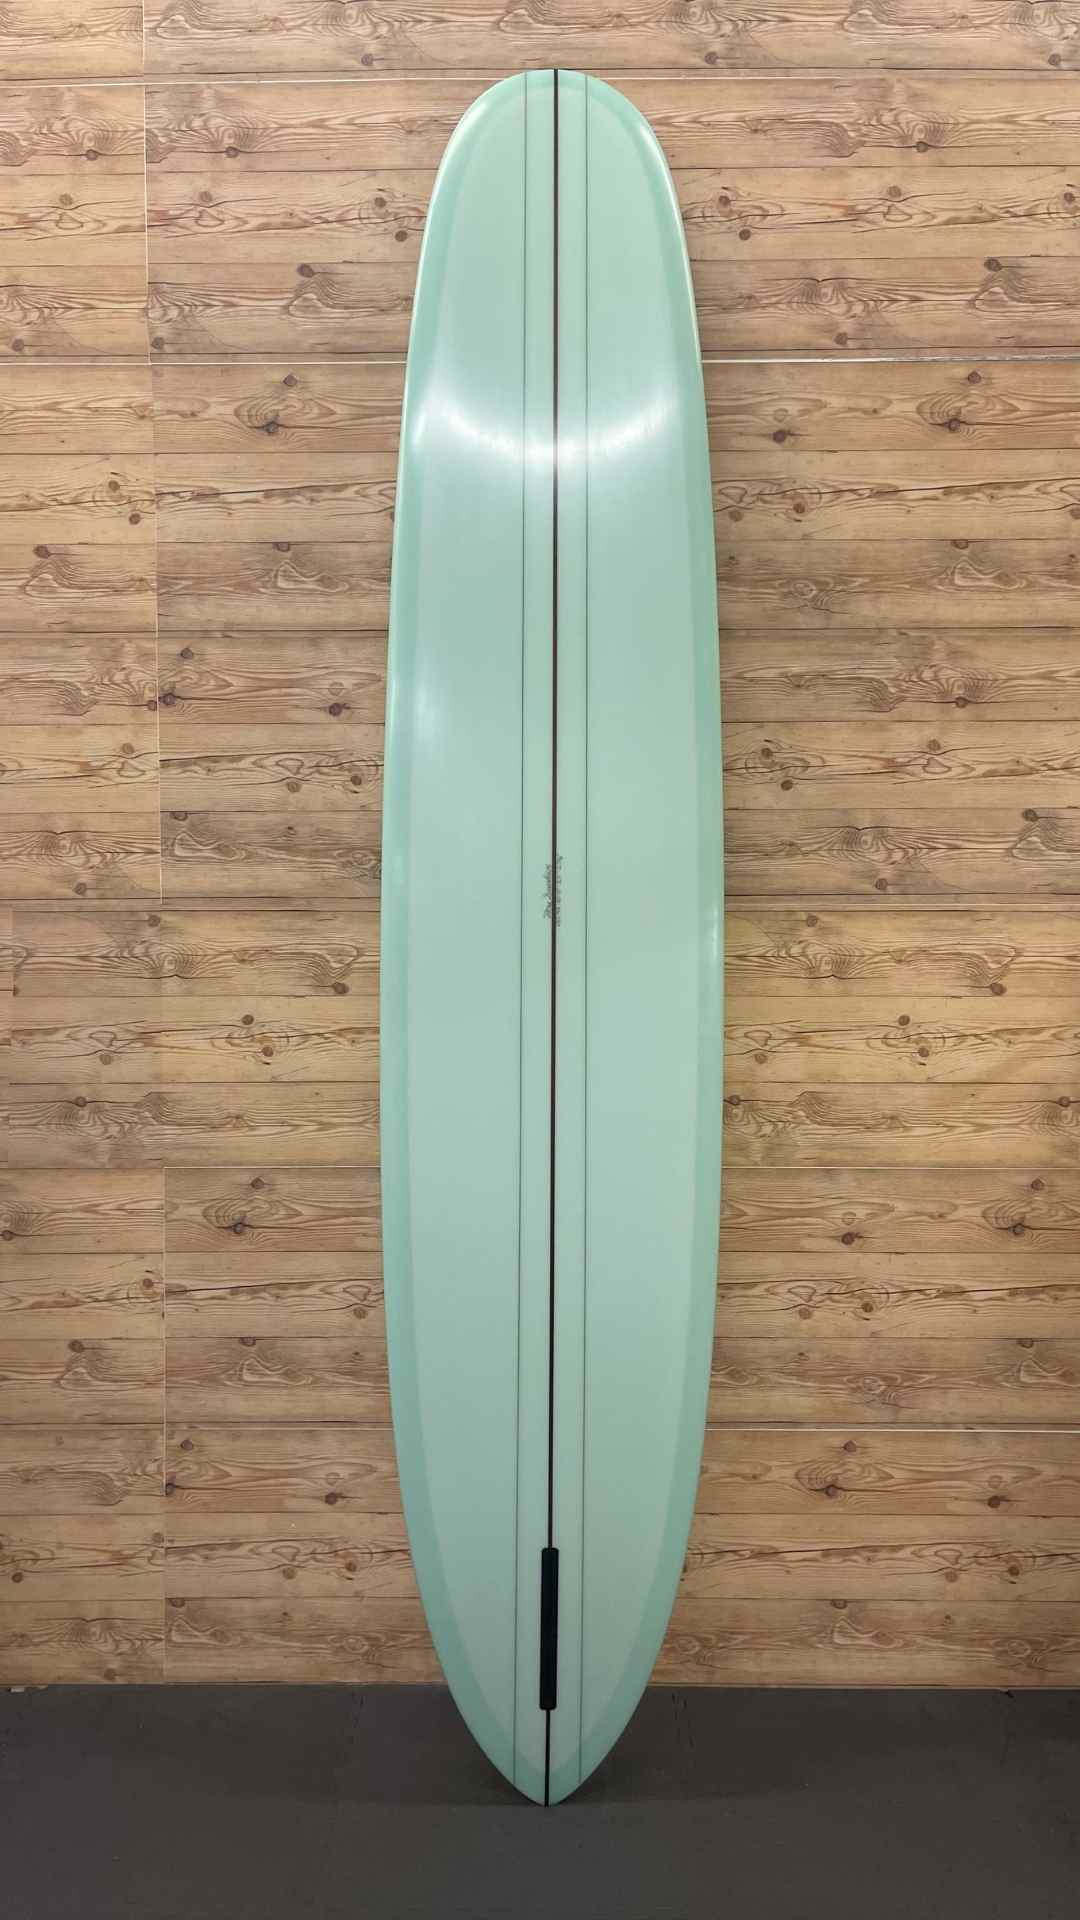 Pintail Noserider 10'